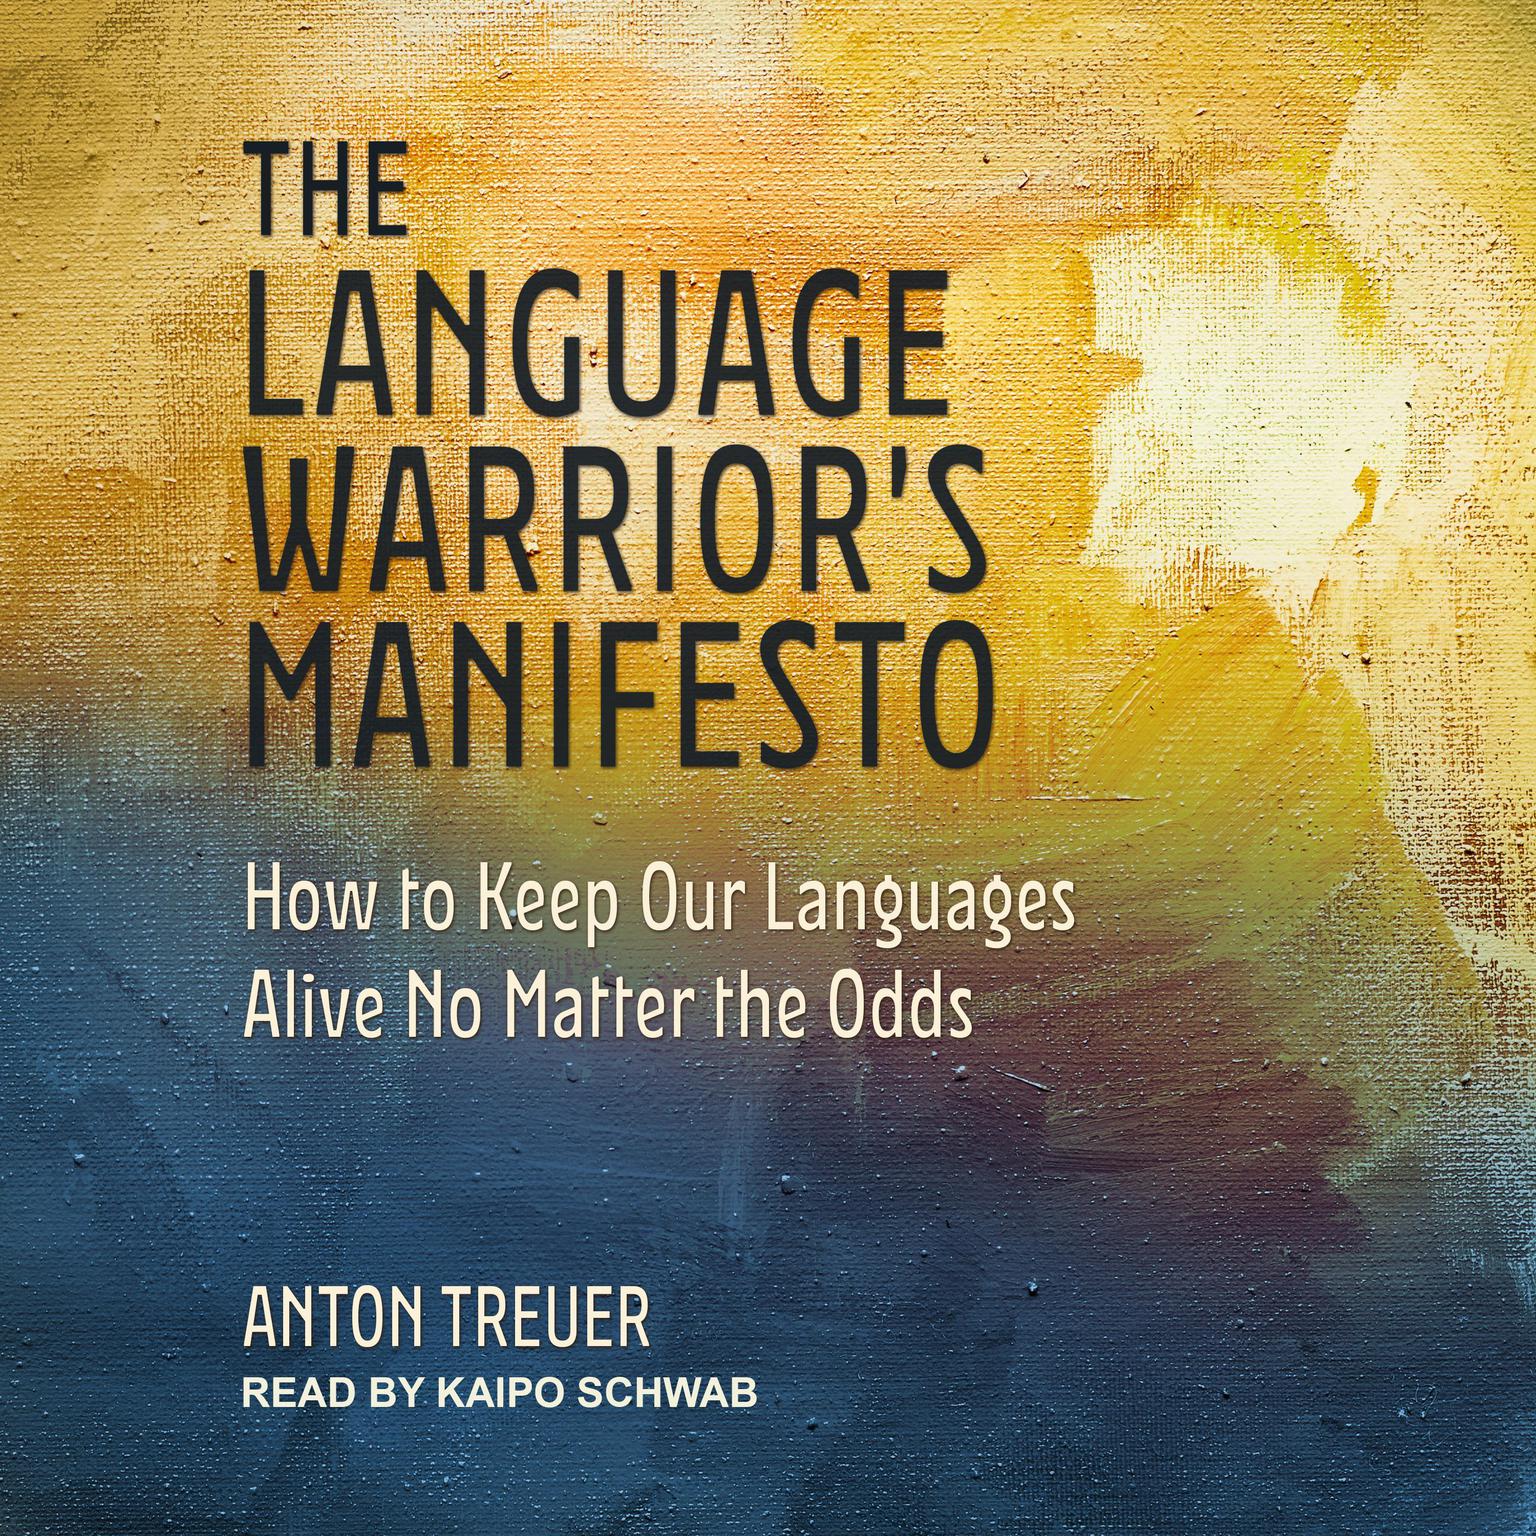 The Language Warriors Manifesto: How to Keep Our Languages Alive No Matter the Odds Audiobook, by Anton Treuer